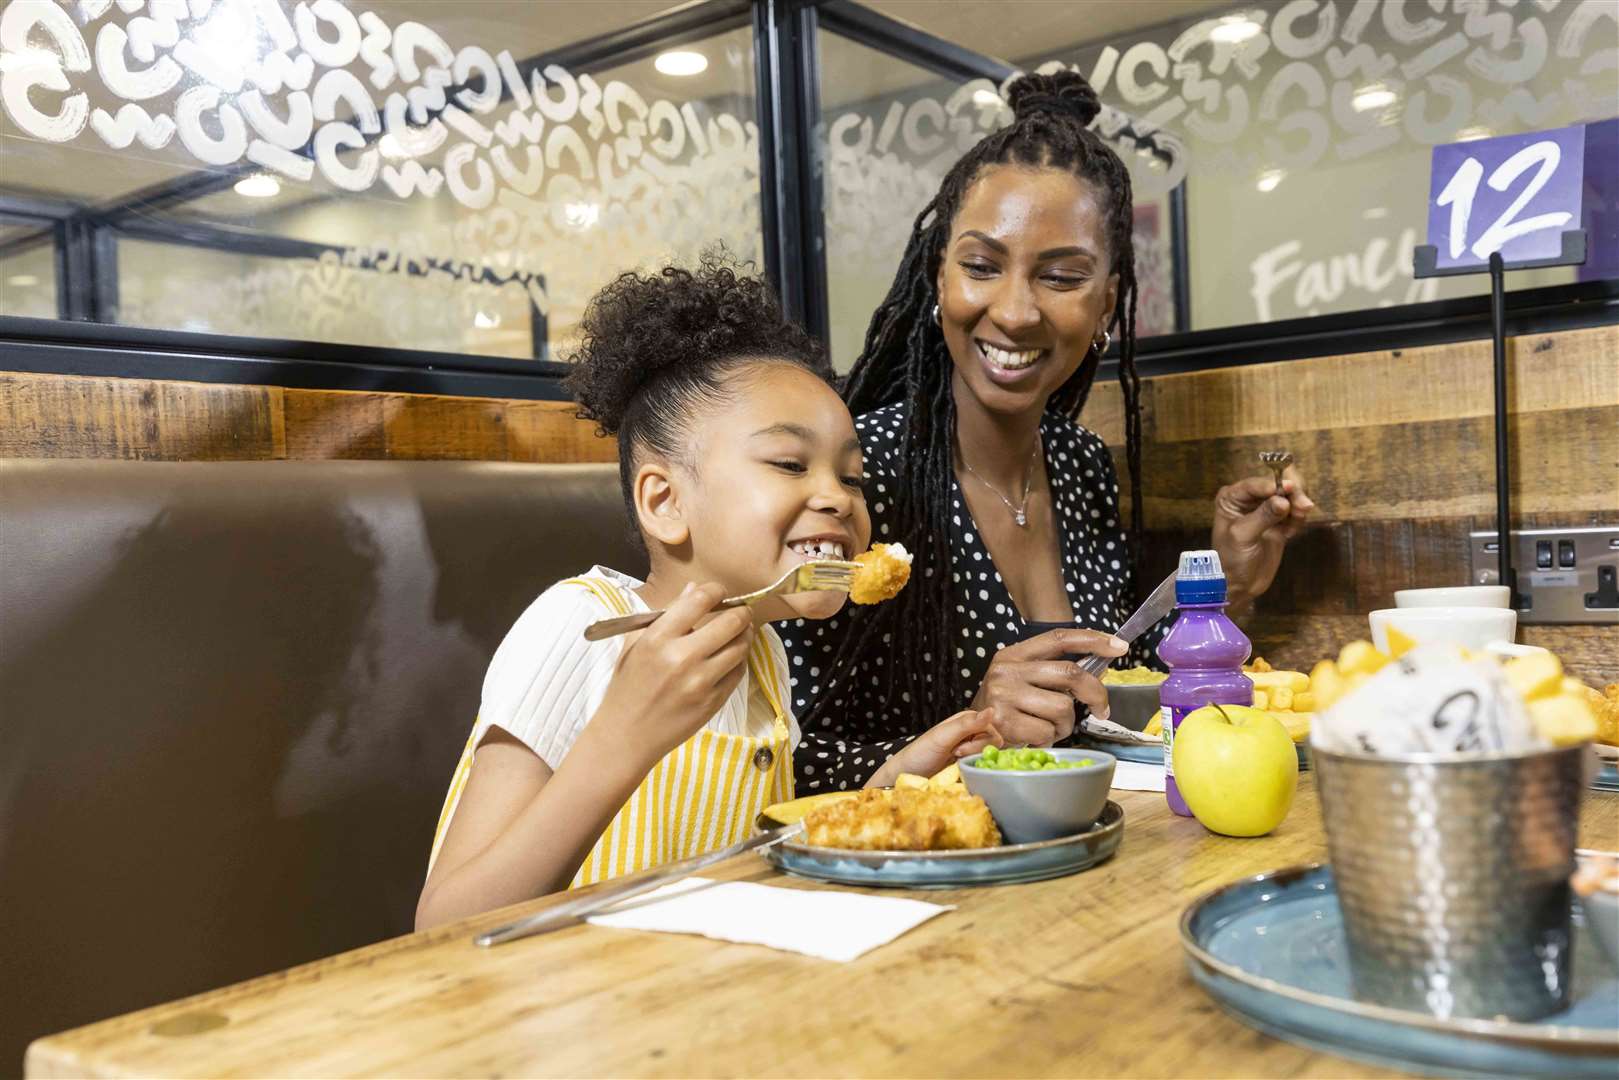 Morrisons cafes across the country are offering a kids eat free deal throughout the summer break